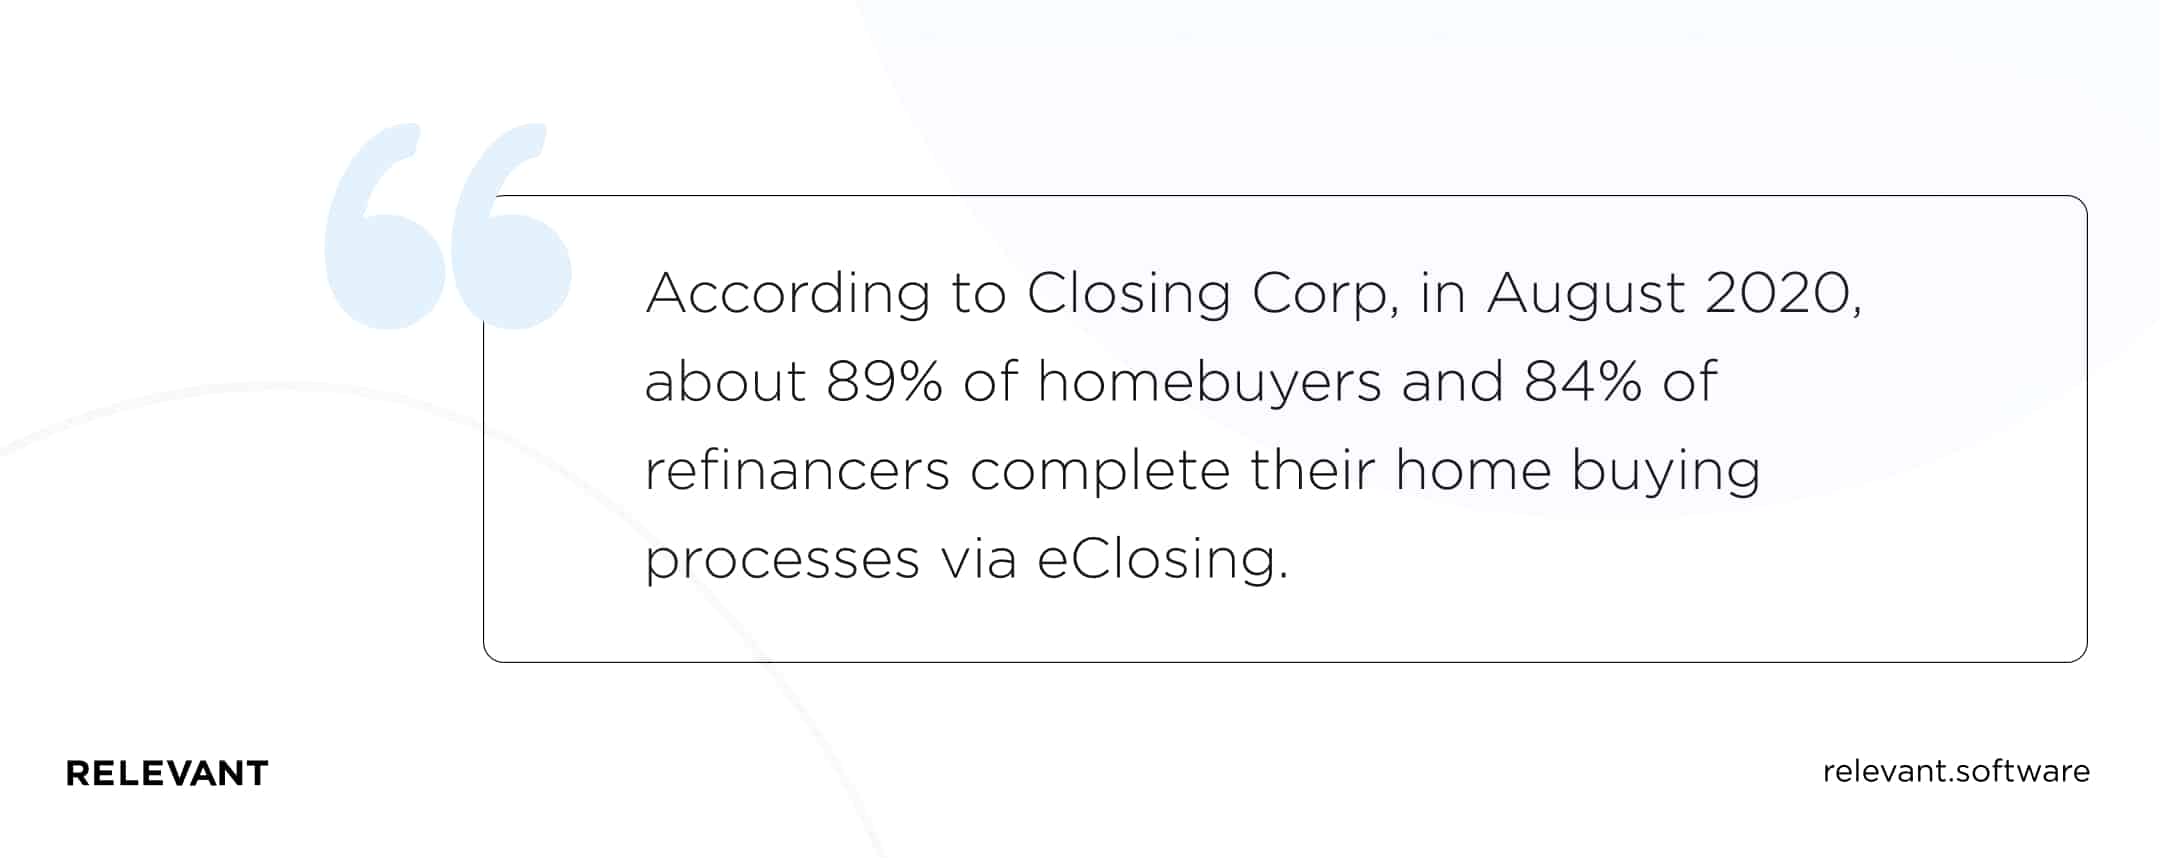 According to the data firm Closing Corp, in August 2020, about 89% of homebuyers and 84% of refinancers complete their home buying processes via eClosing.